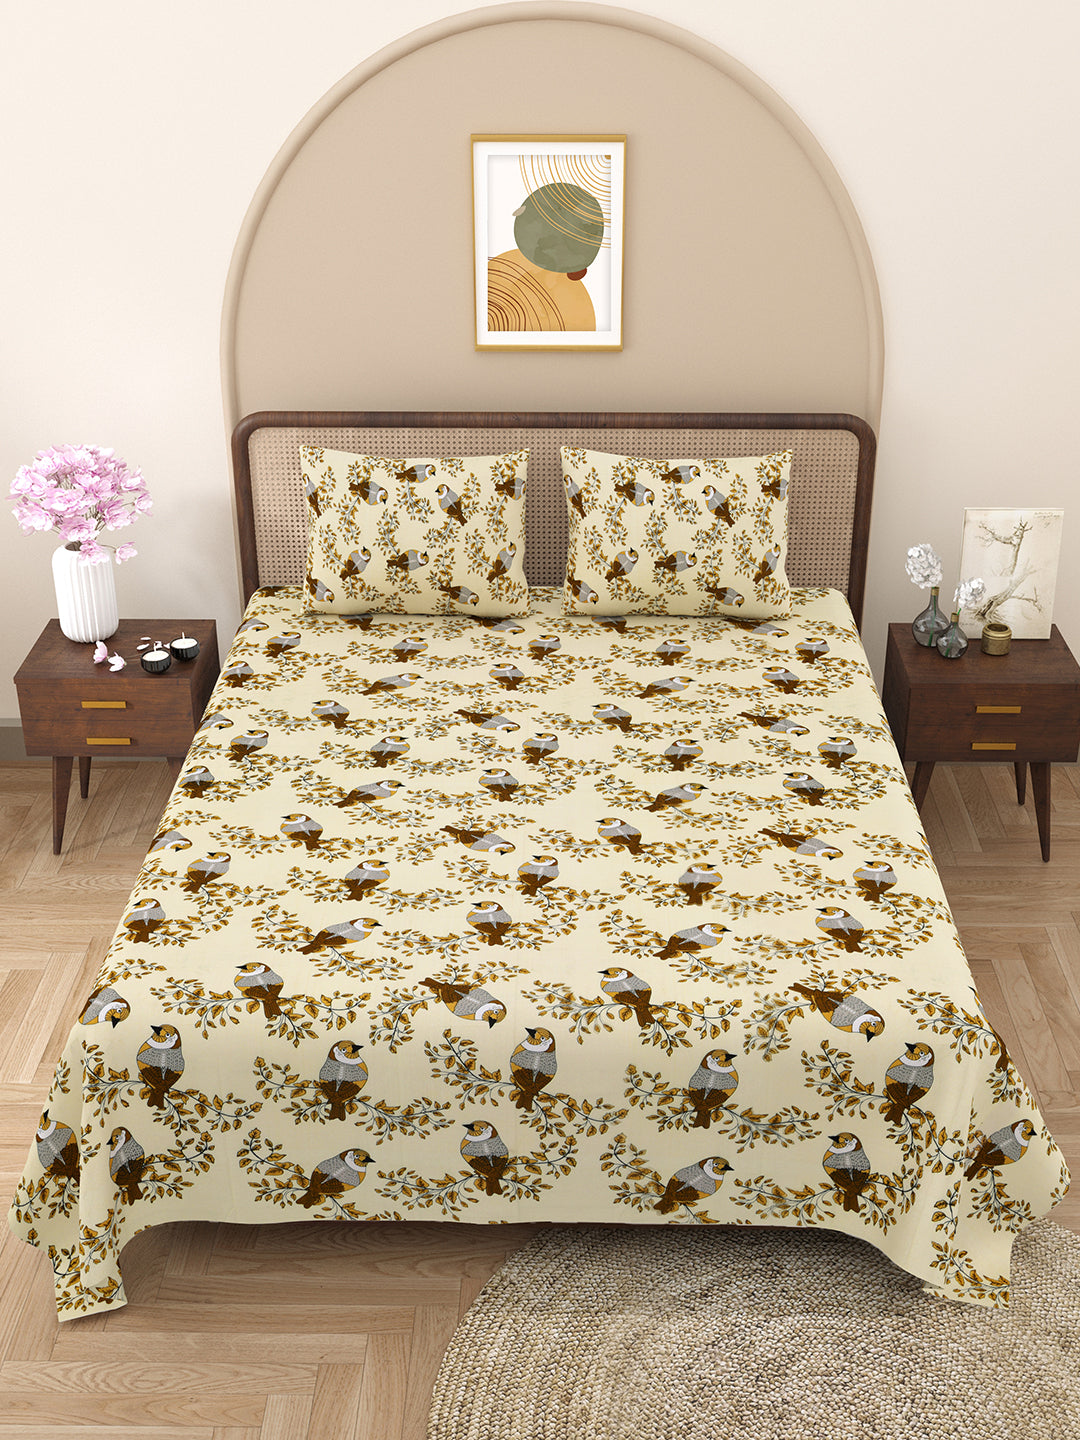 Bella Casa Fashion & Retail Ltd BEDSHEET 88 X 96 Inch / Yellow / Cotton Double Bedsheet with 2 Pillow Covers Cotton Floral Design Yellow Colour - Element Collection